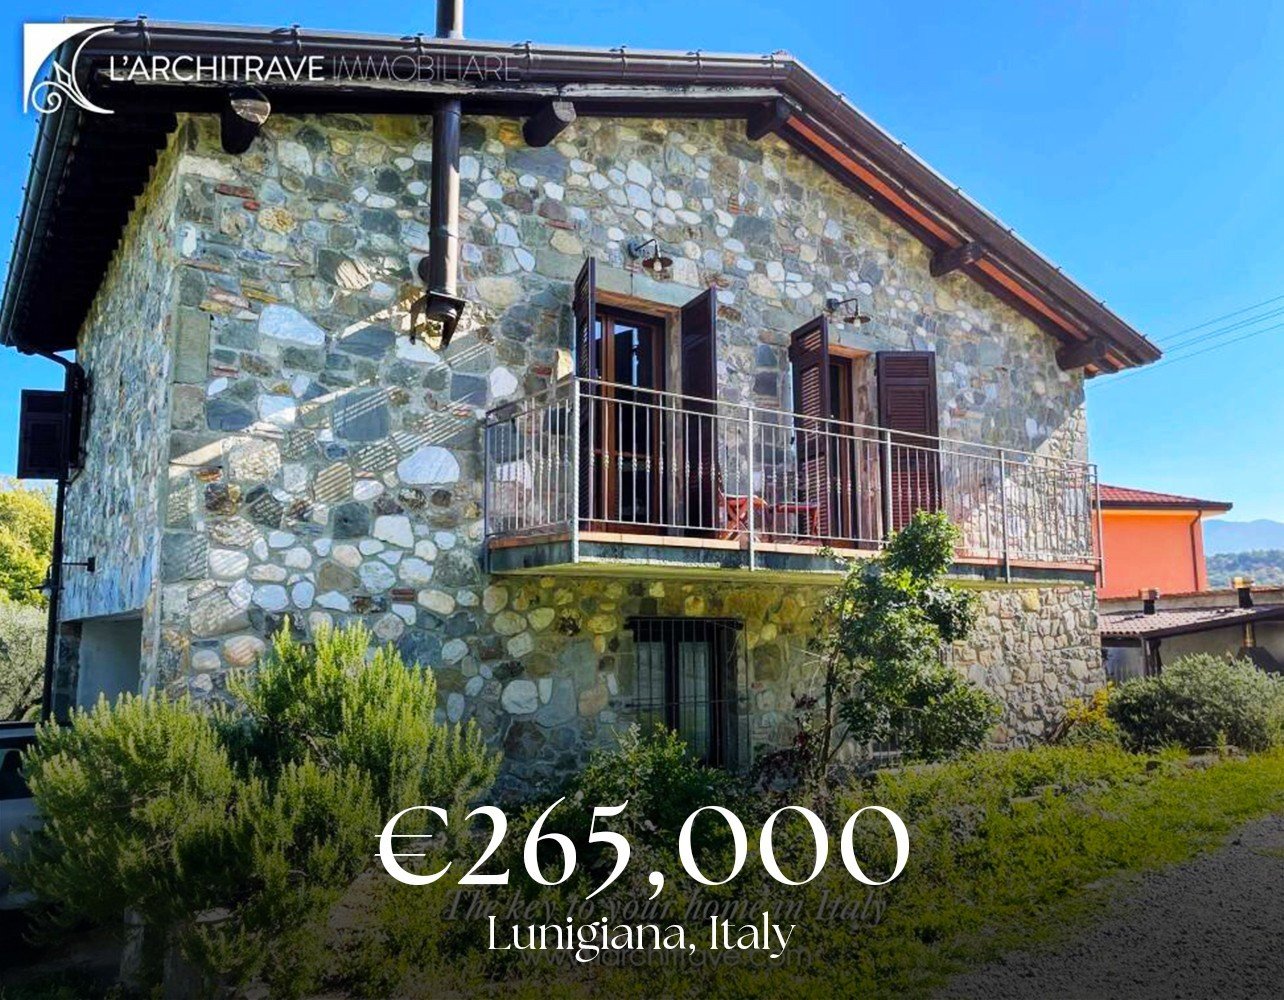 Embrace la dolce vita in this picturesque 2-bedroom villa nestled in Tuscany's rolling hills of Lunigiana! Featuring 125 square meters of modern living space, this renovated retreat is a blend of comfort and style. Enjoy leisurely evenings on the bal